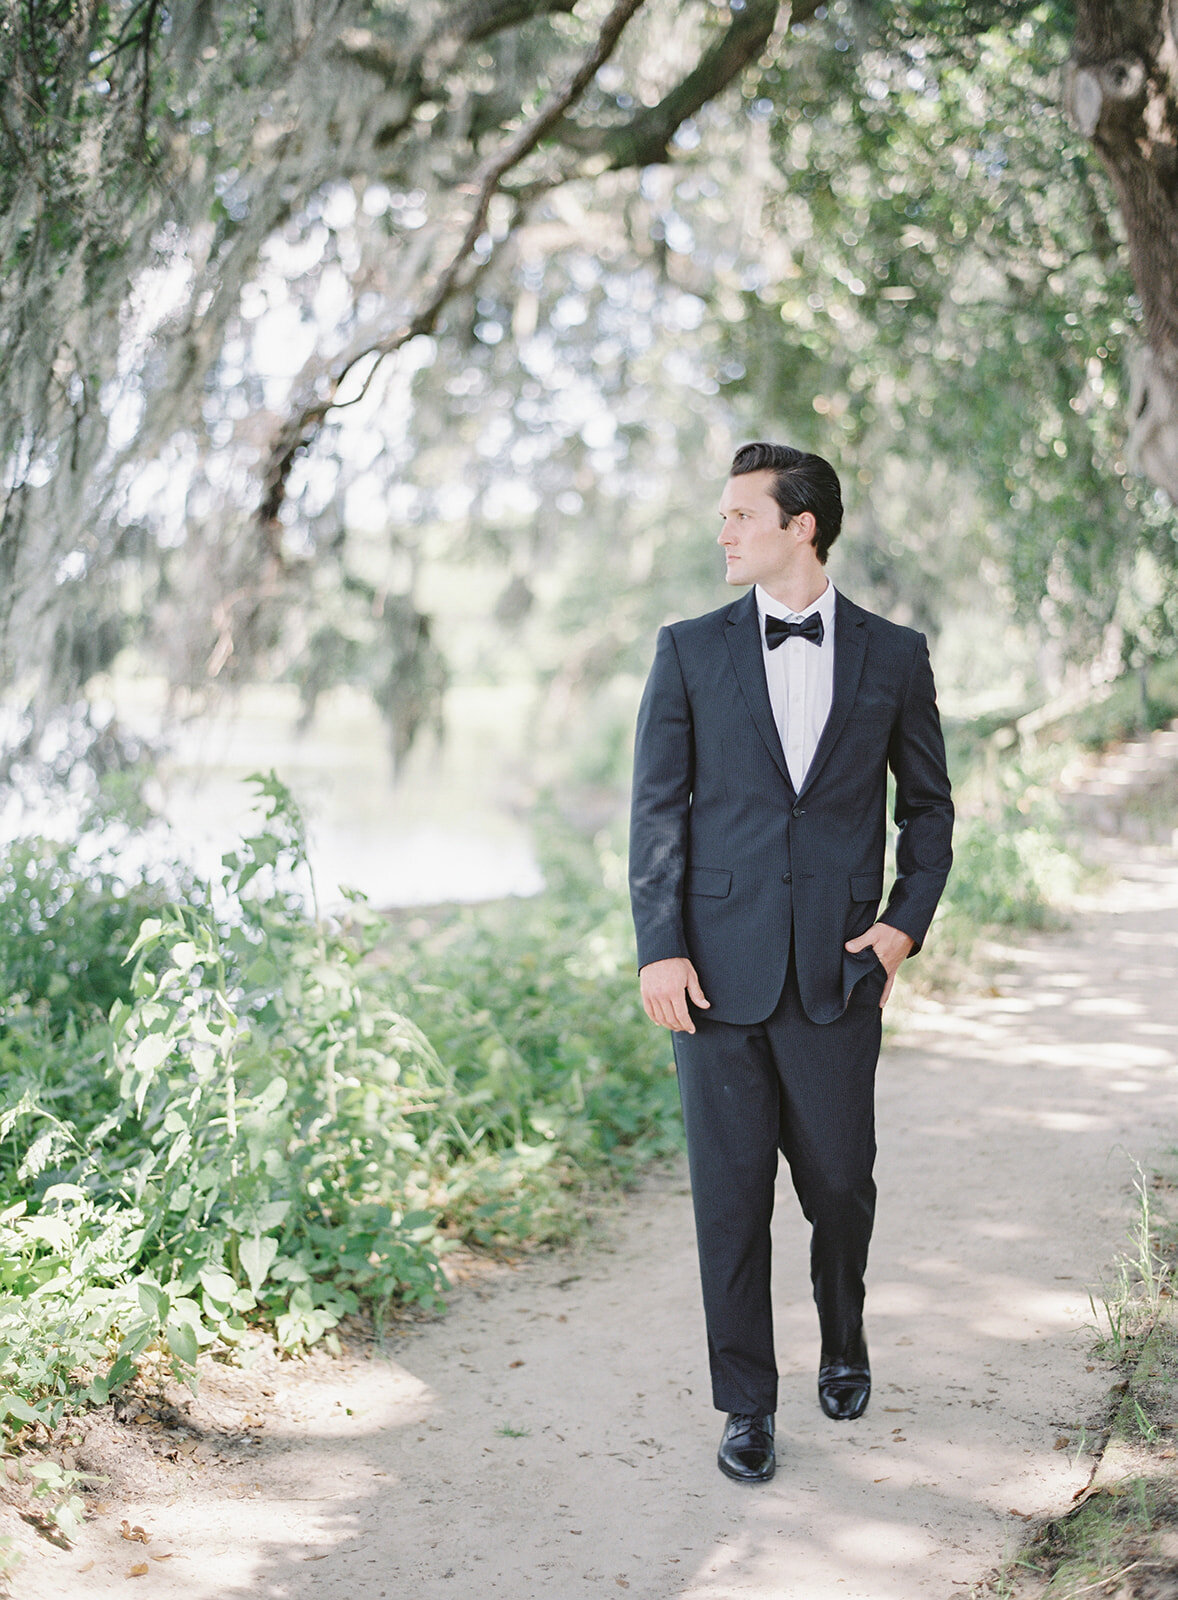 Groom walking down a path under oak trees. Photographed by wedding photographers in Charleston Amy Mulder Photography